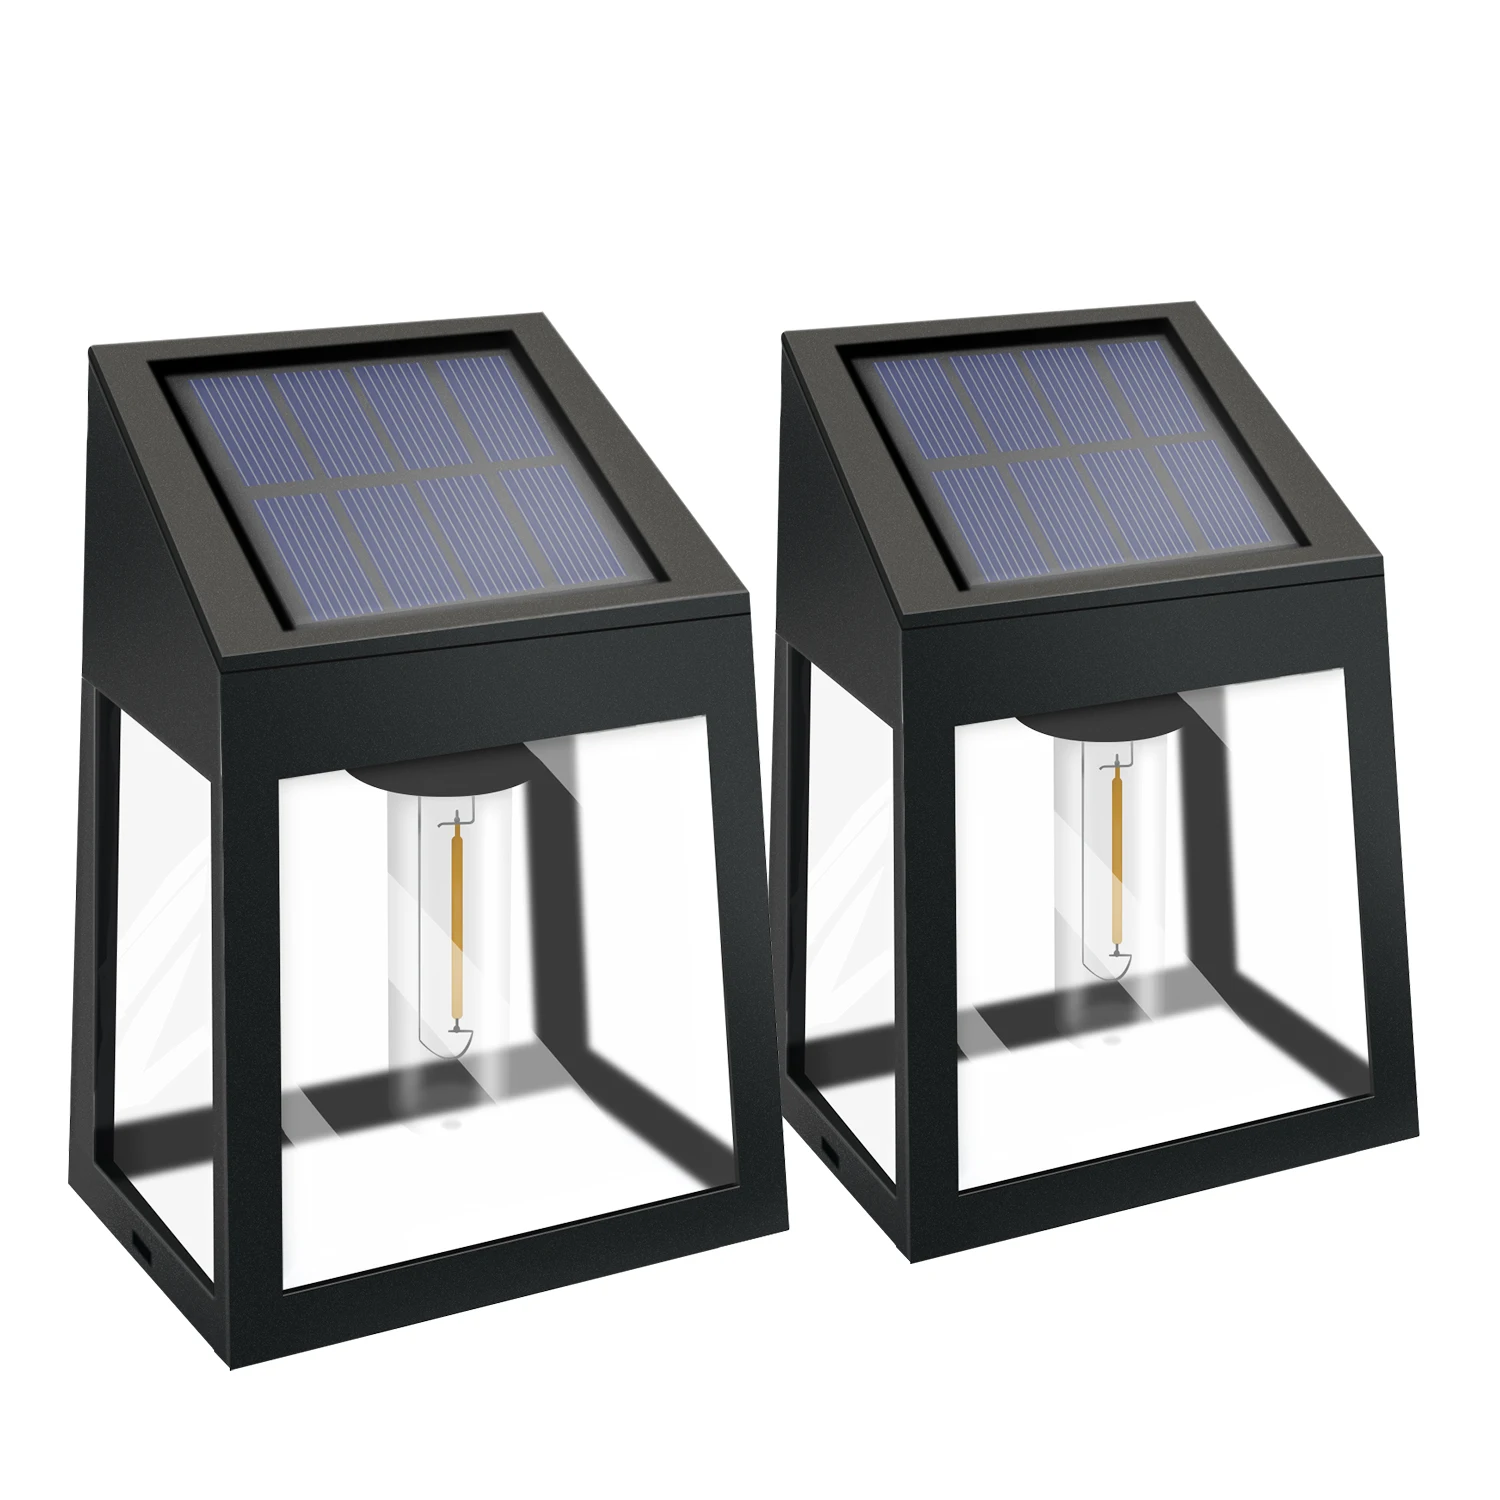 up and down solar wall light auto solar rgb wall light of big volume battery for pathway